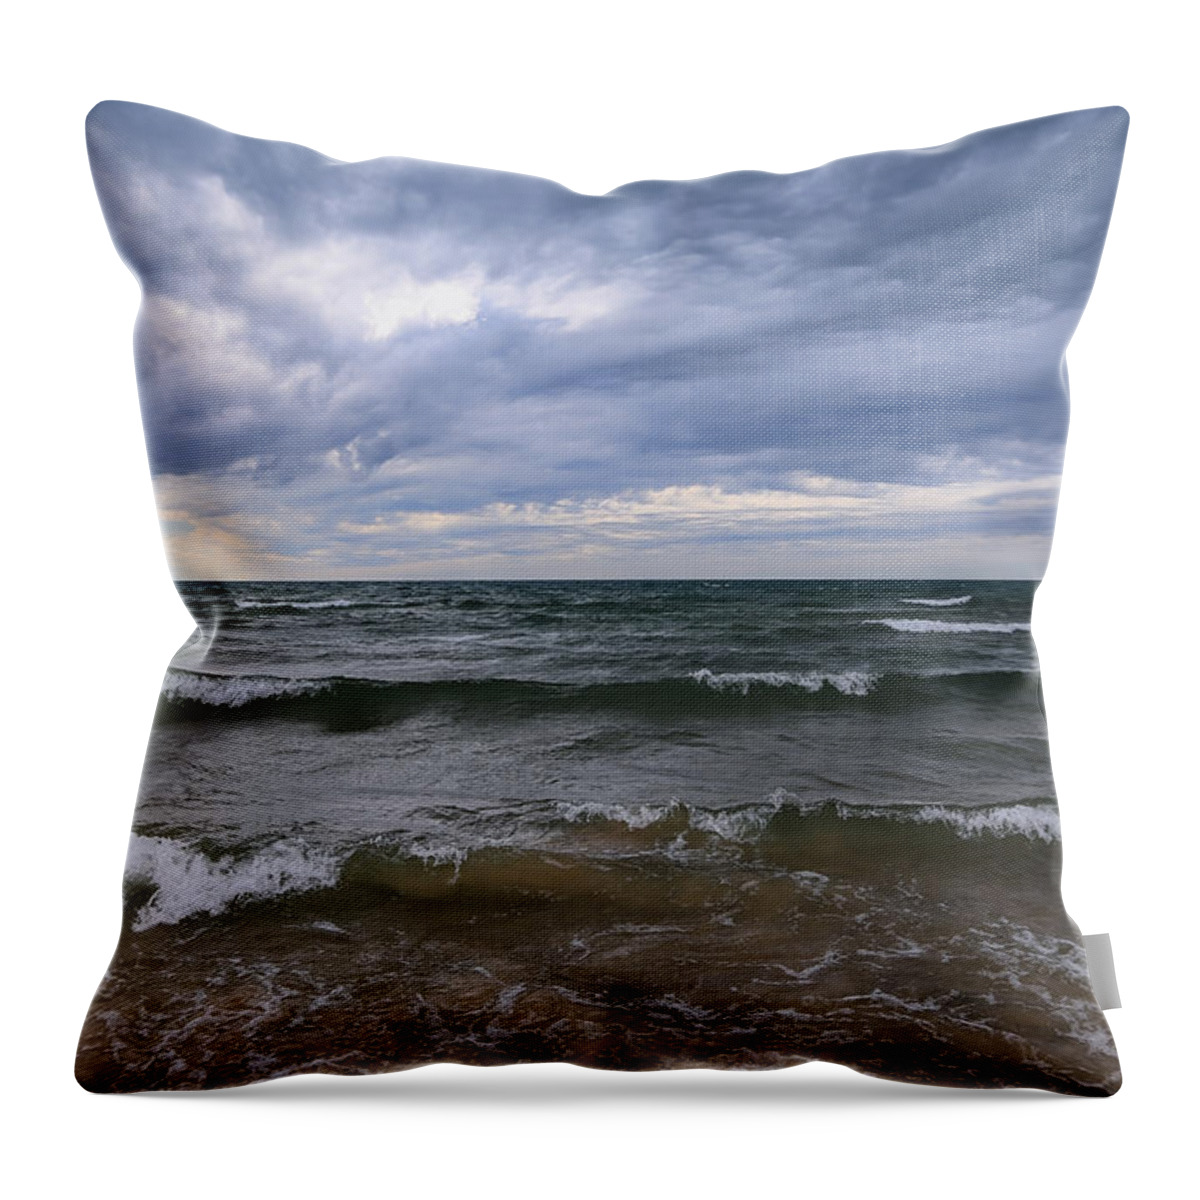 The Heavens Opened Throw Pillow featuring the photograph The Heavens Opened #1 by Rachel Cohen